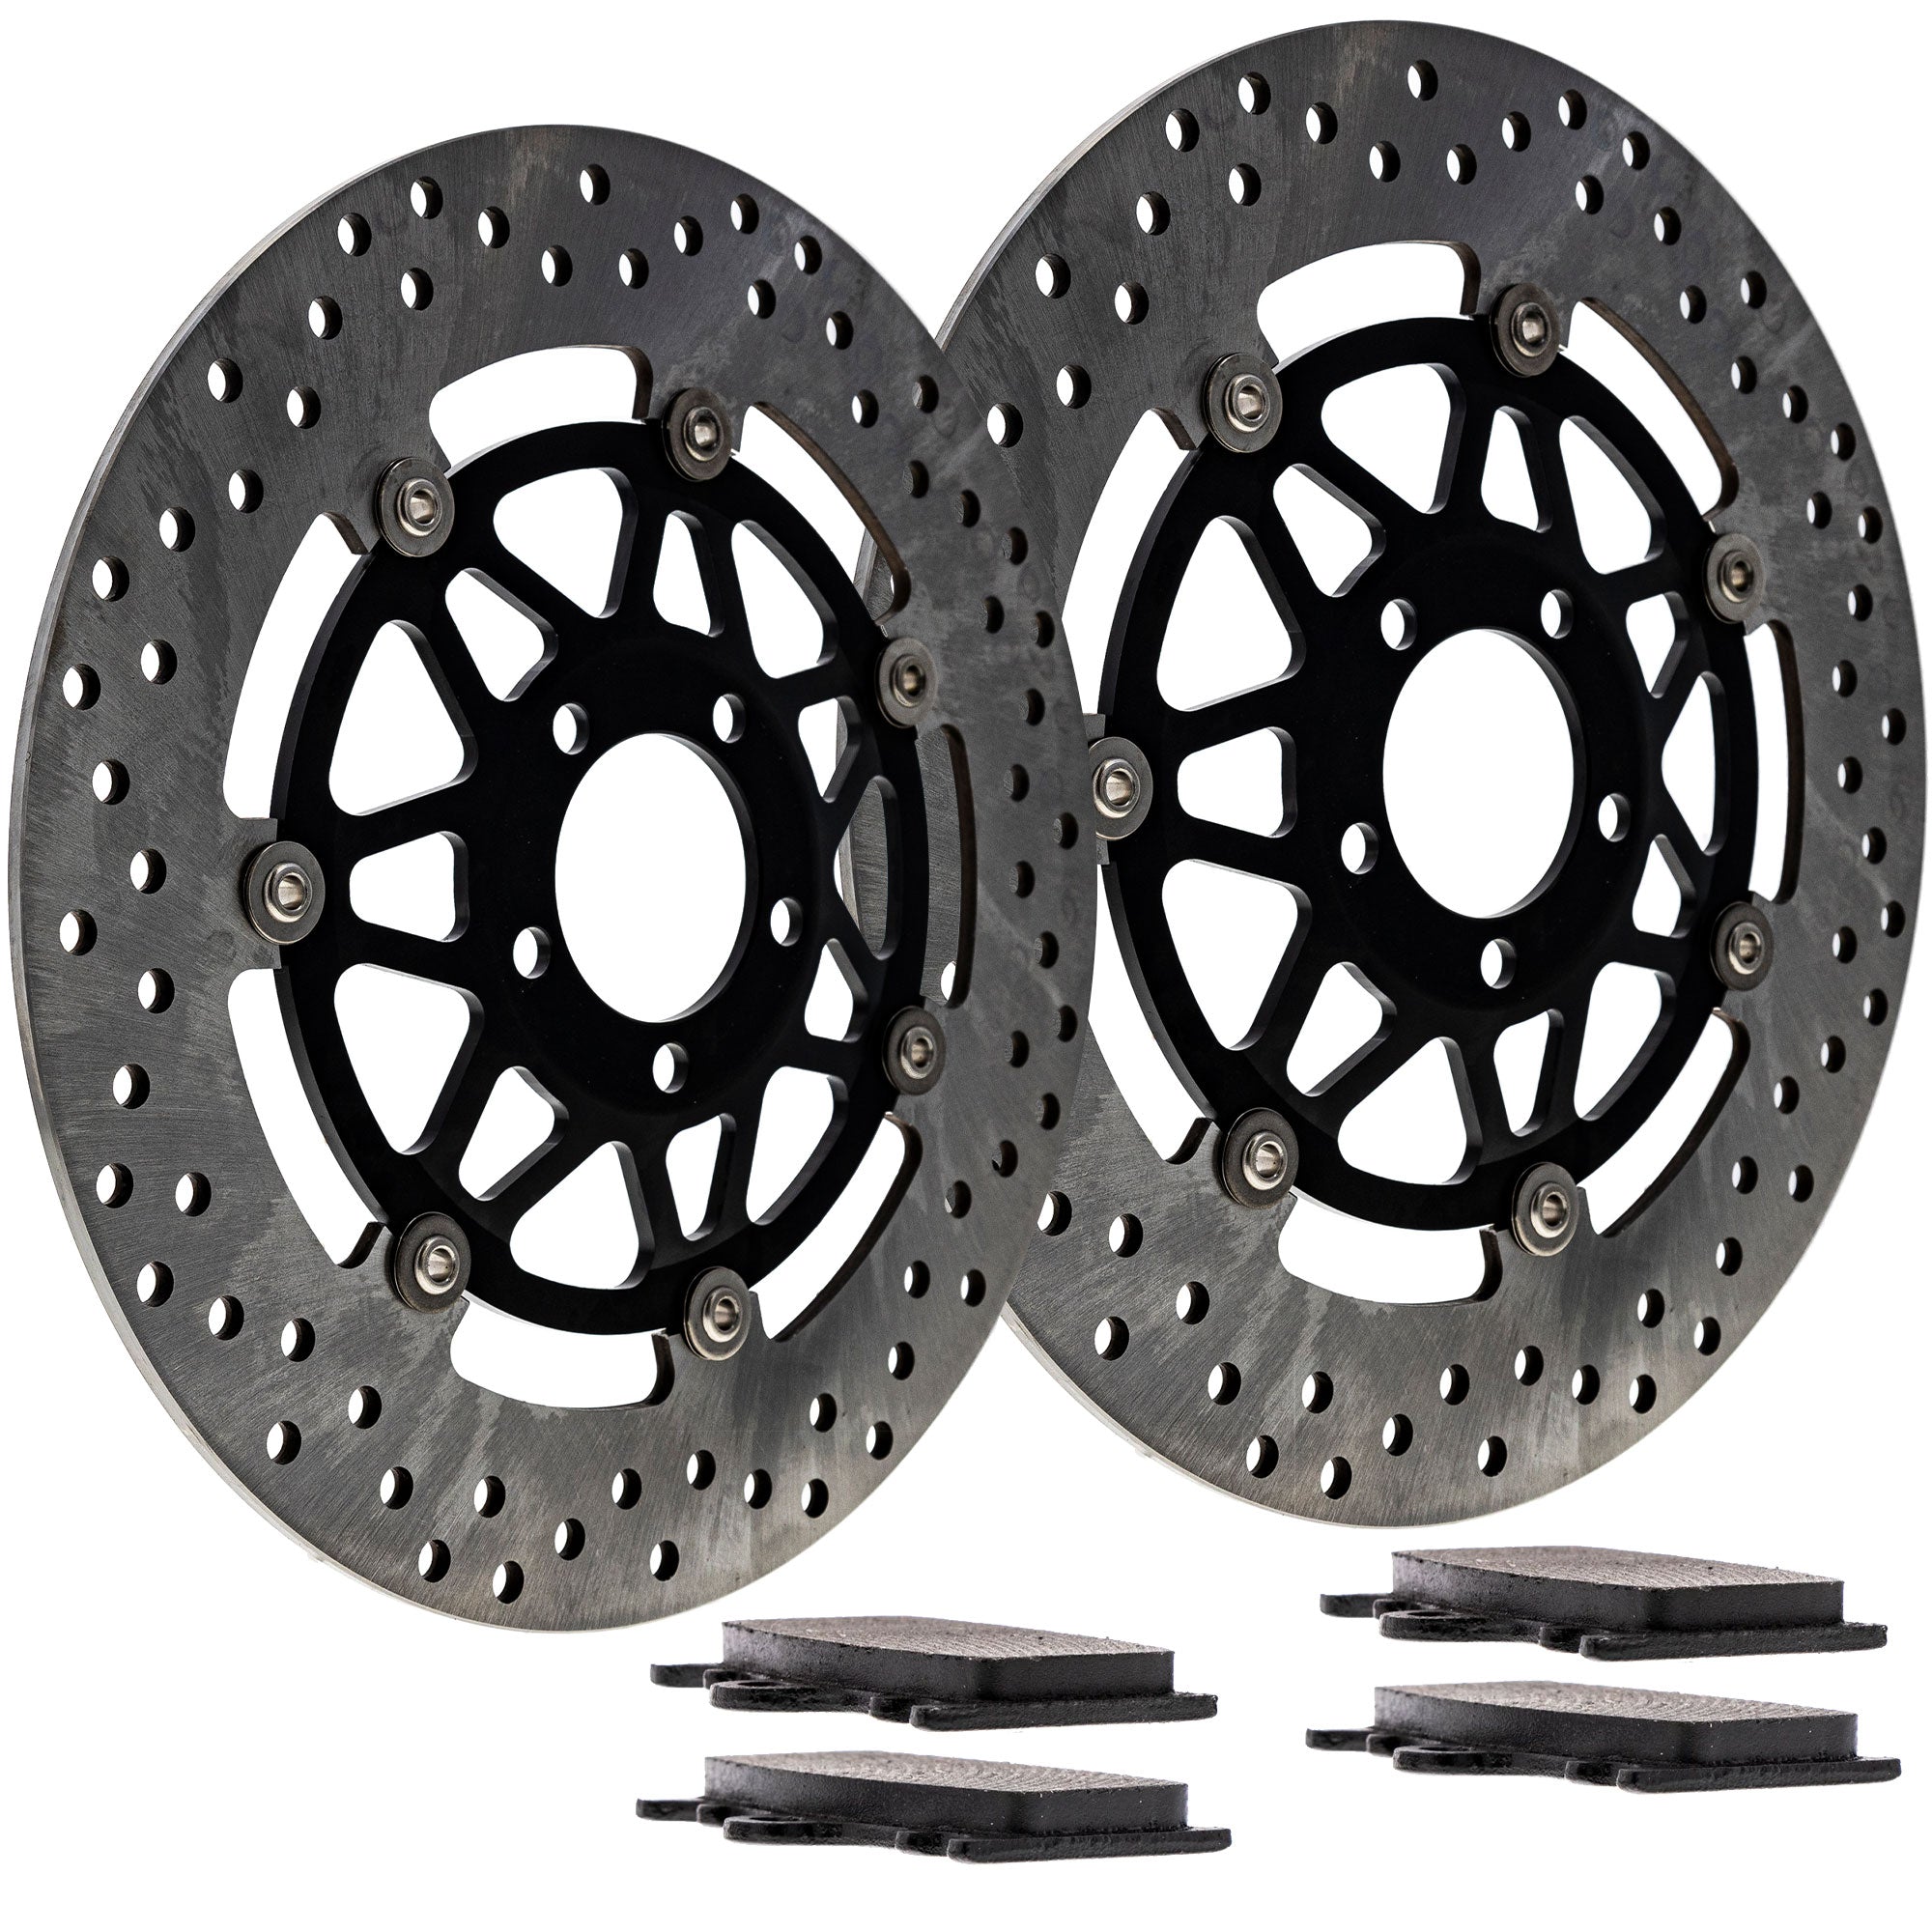 Complete Front or Rear Pad and Rotor Set for zOTHER Triumph Ducati BMW Ninja 43082-0016 NICHE MK1006705